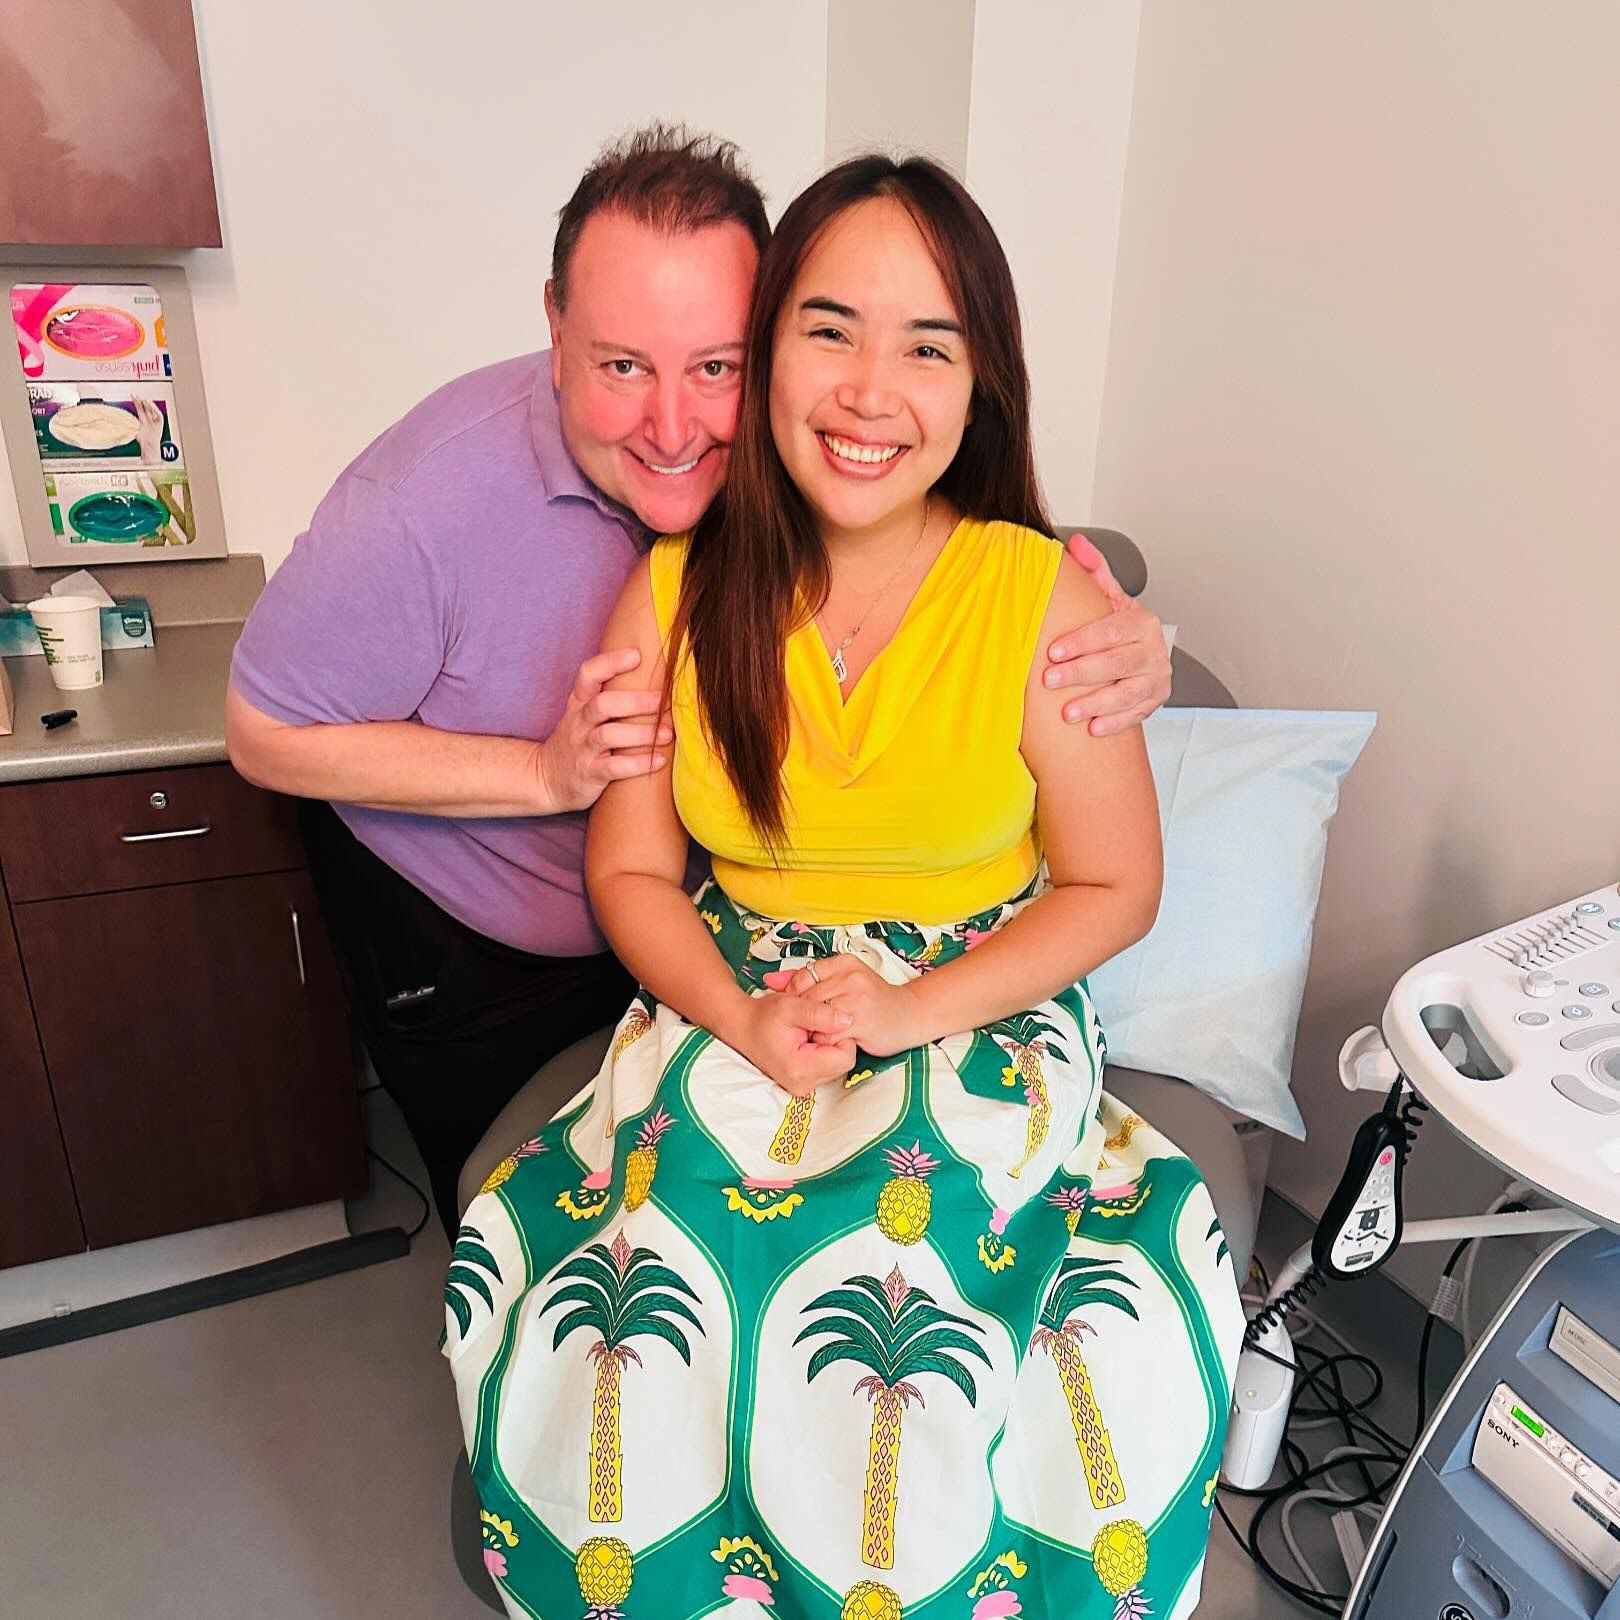 ’90 Day Fiance’ Star Annie Suwan Is Pregnant, Expecting 1st Baby With David Toborowsky